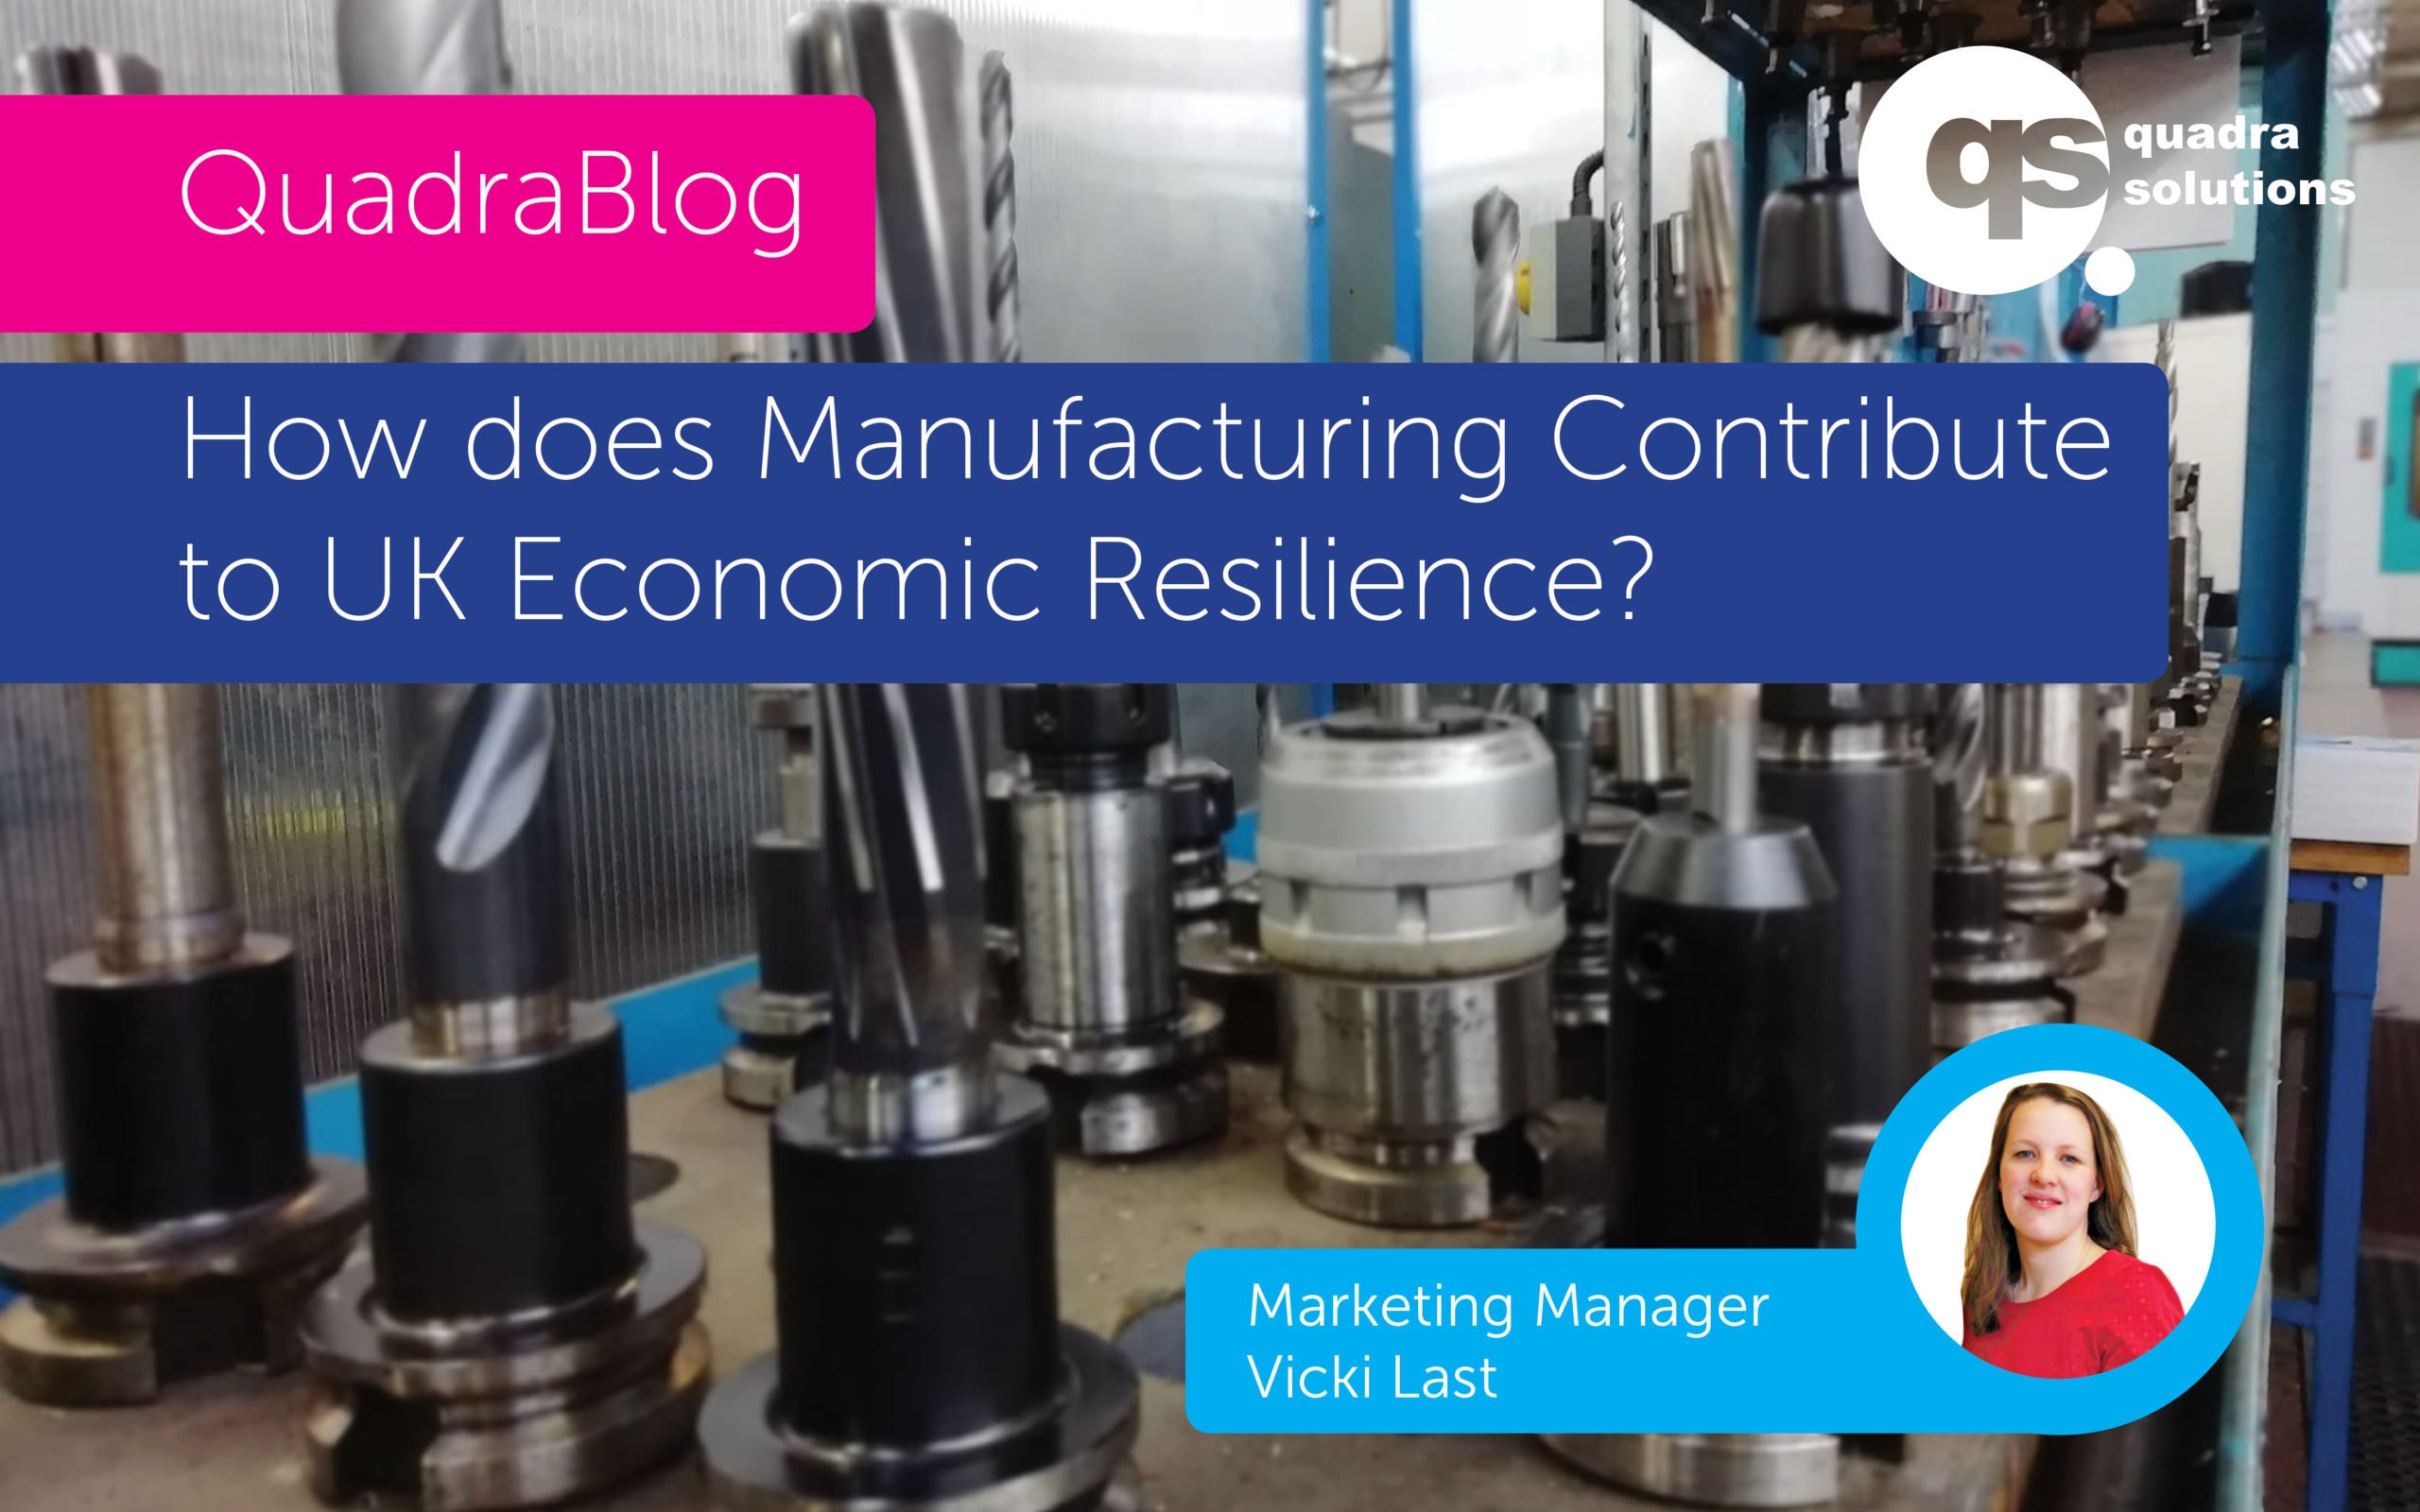 How does Manufacturing Contribute to UK Economic Resilience?